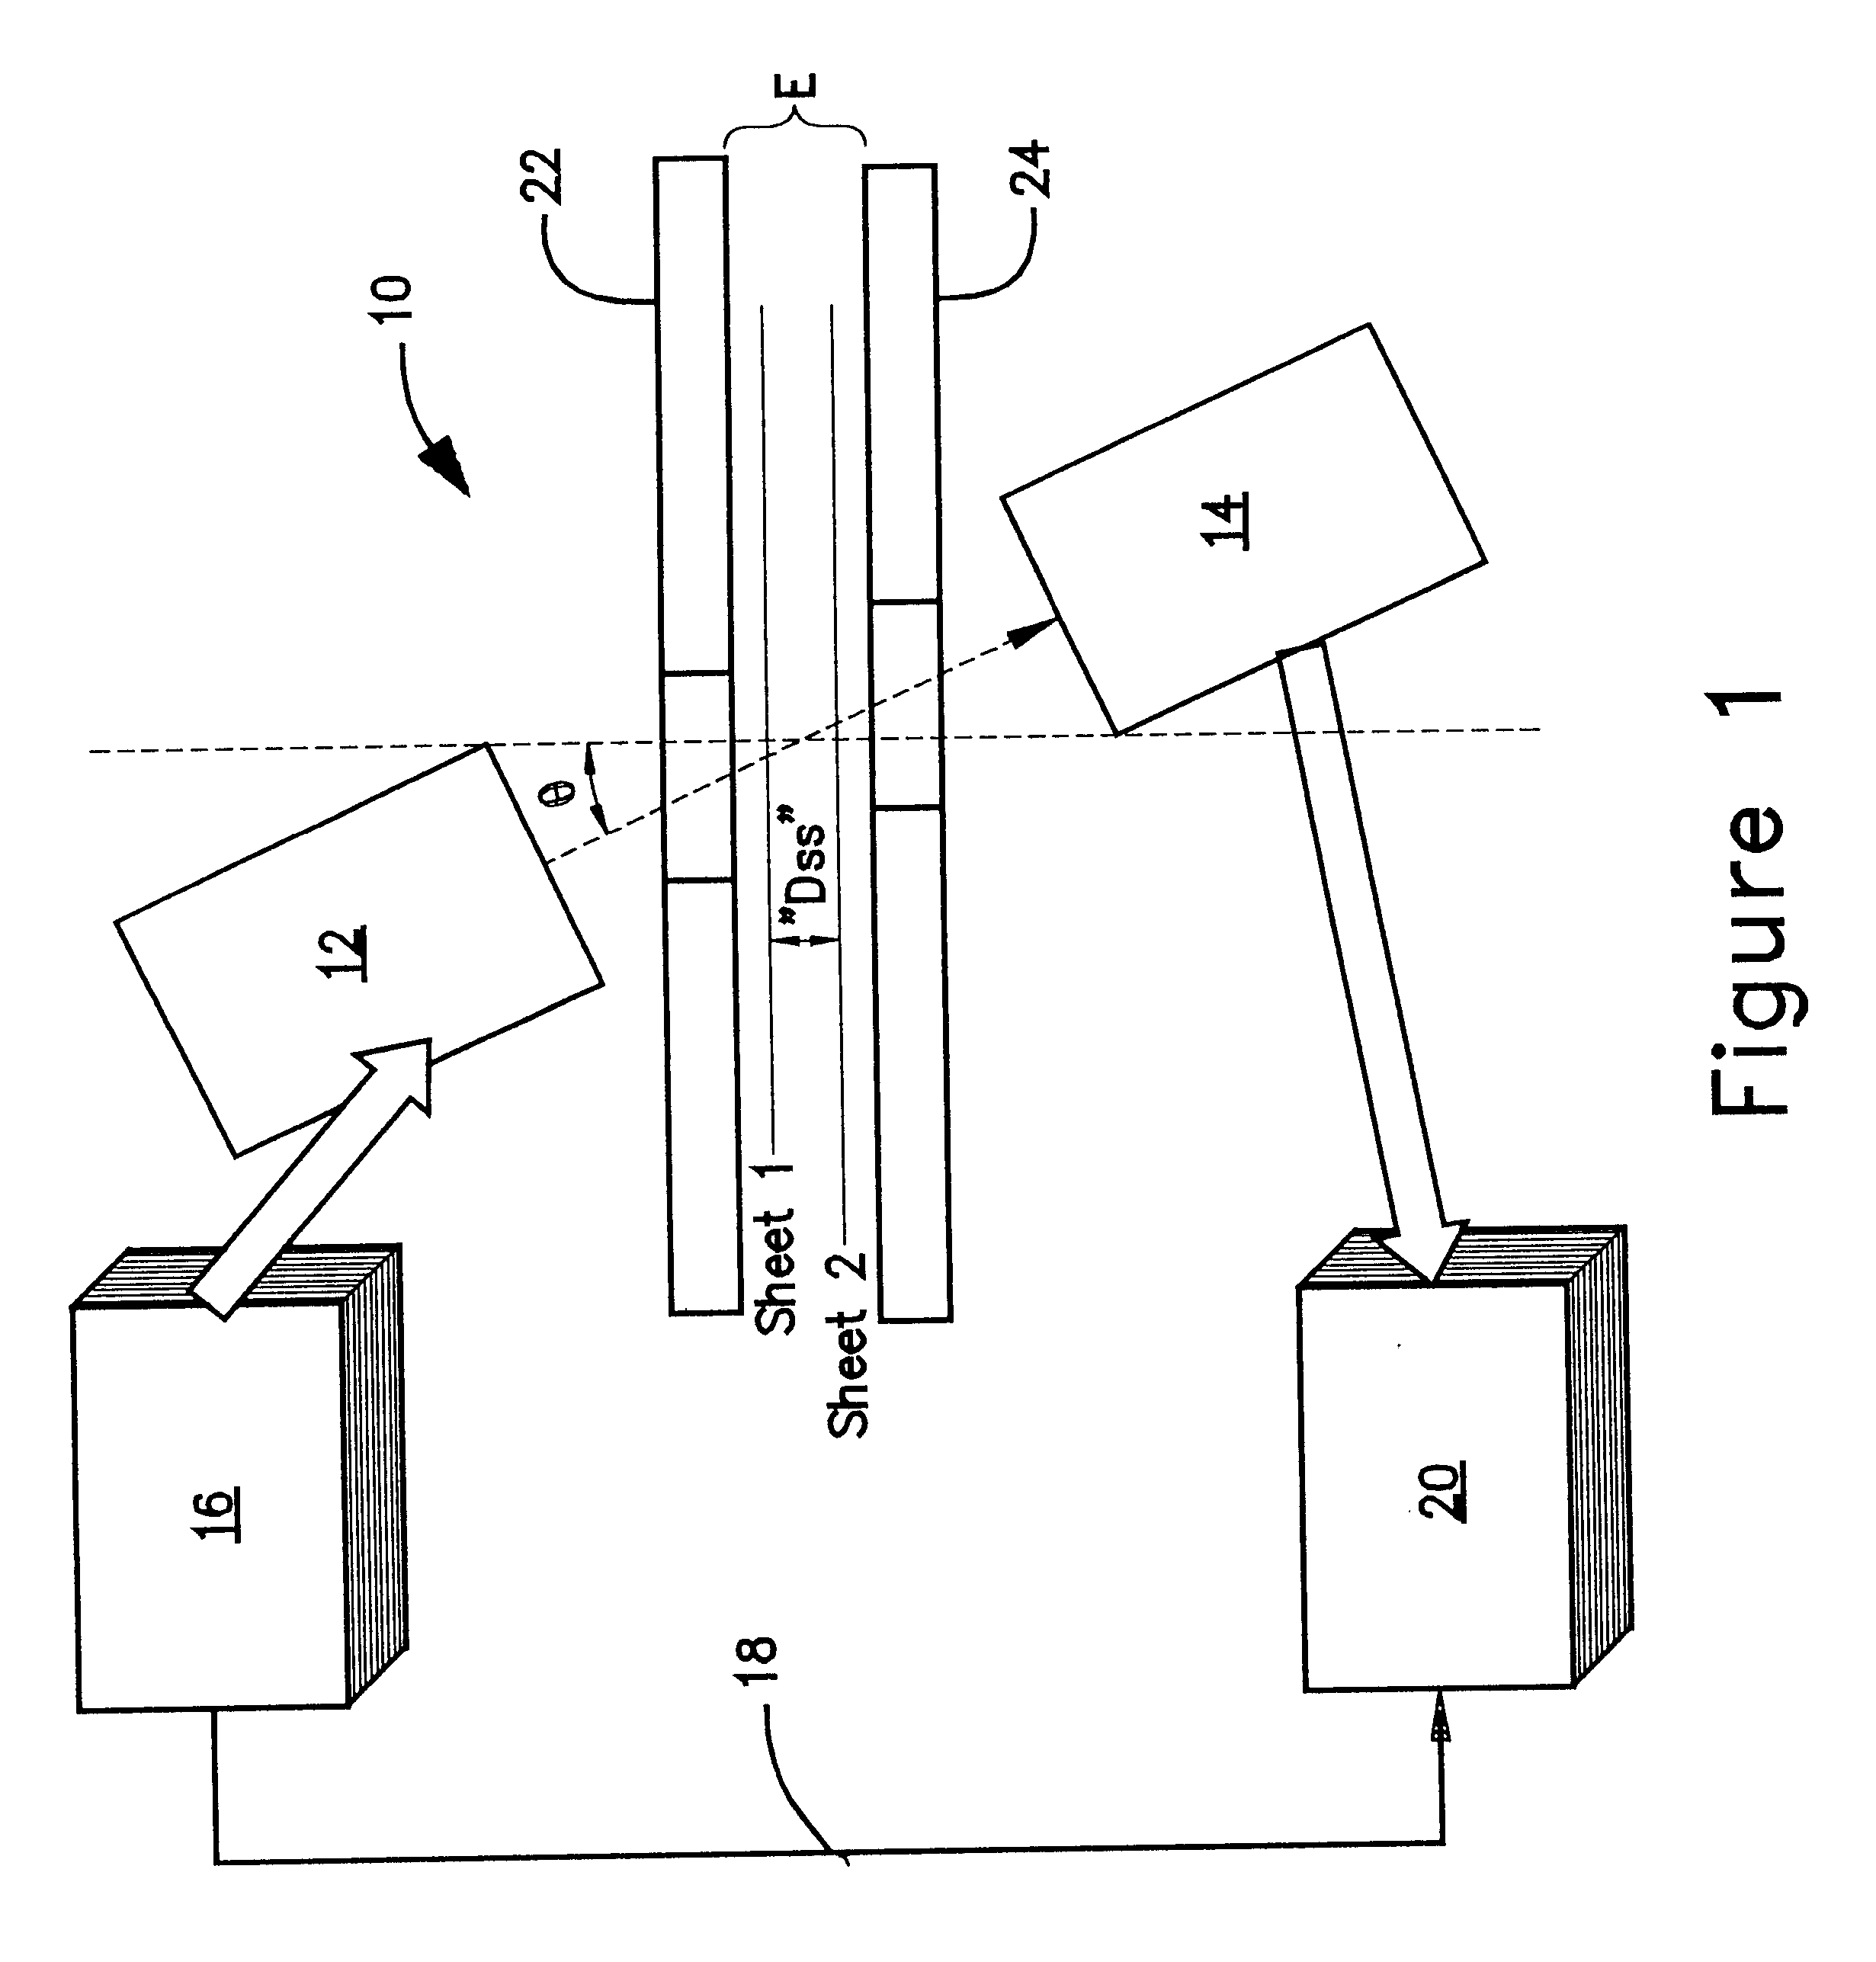 Method and apparatus for plural document detection